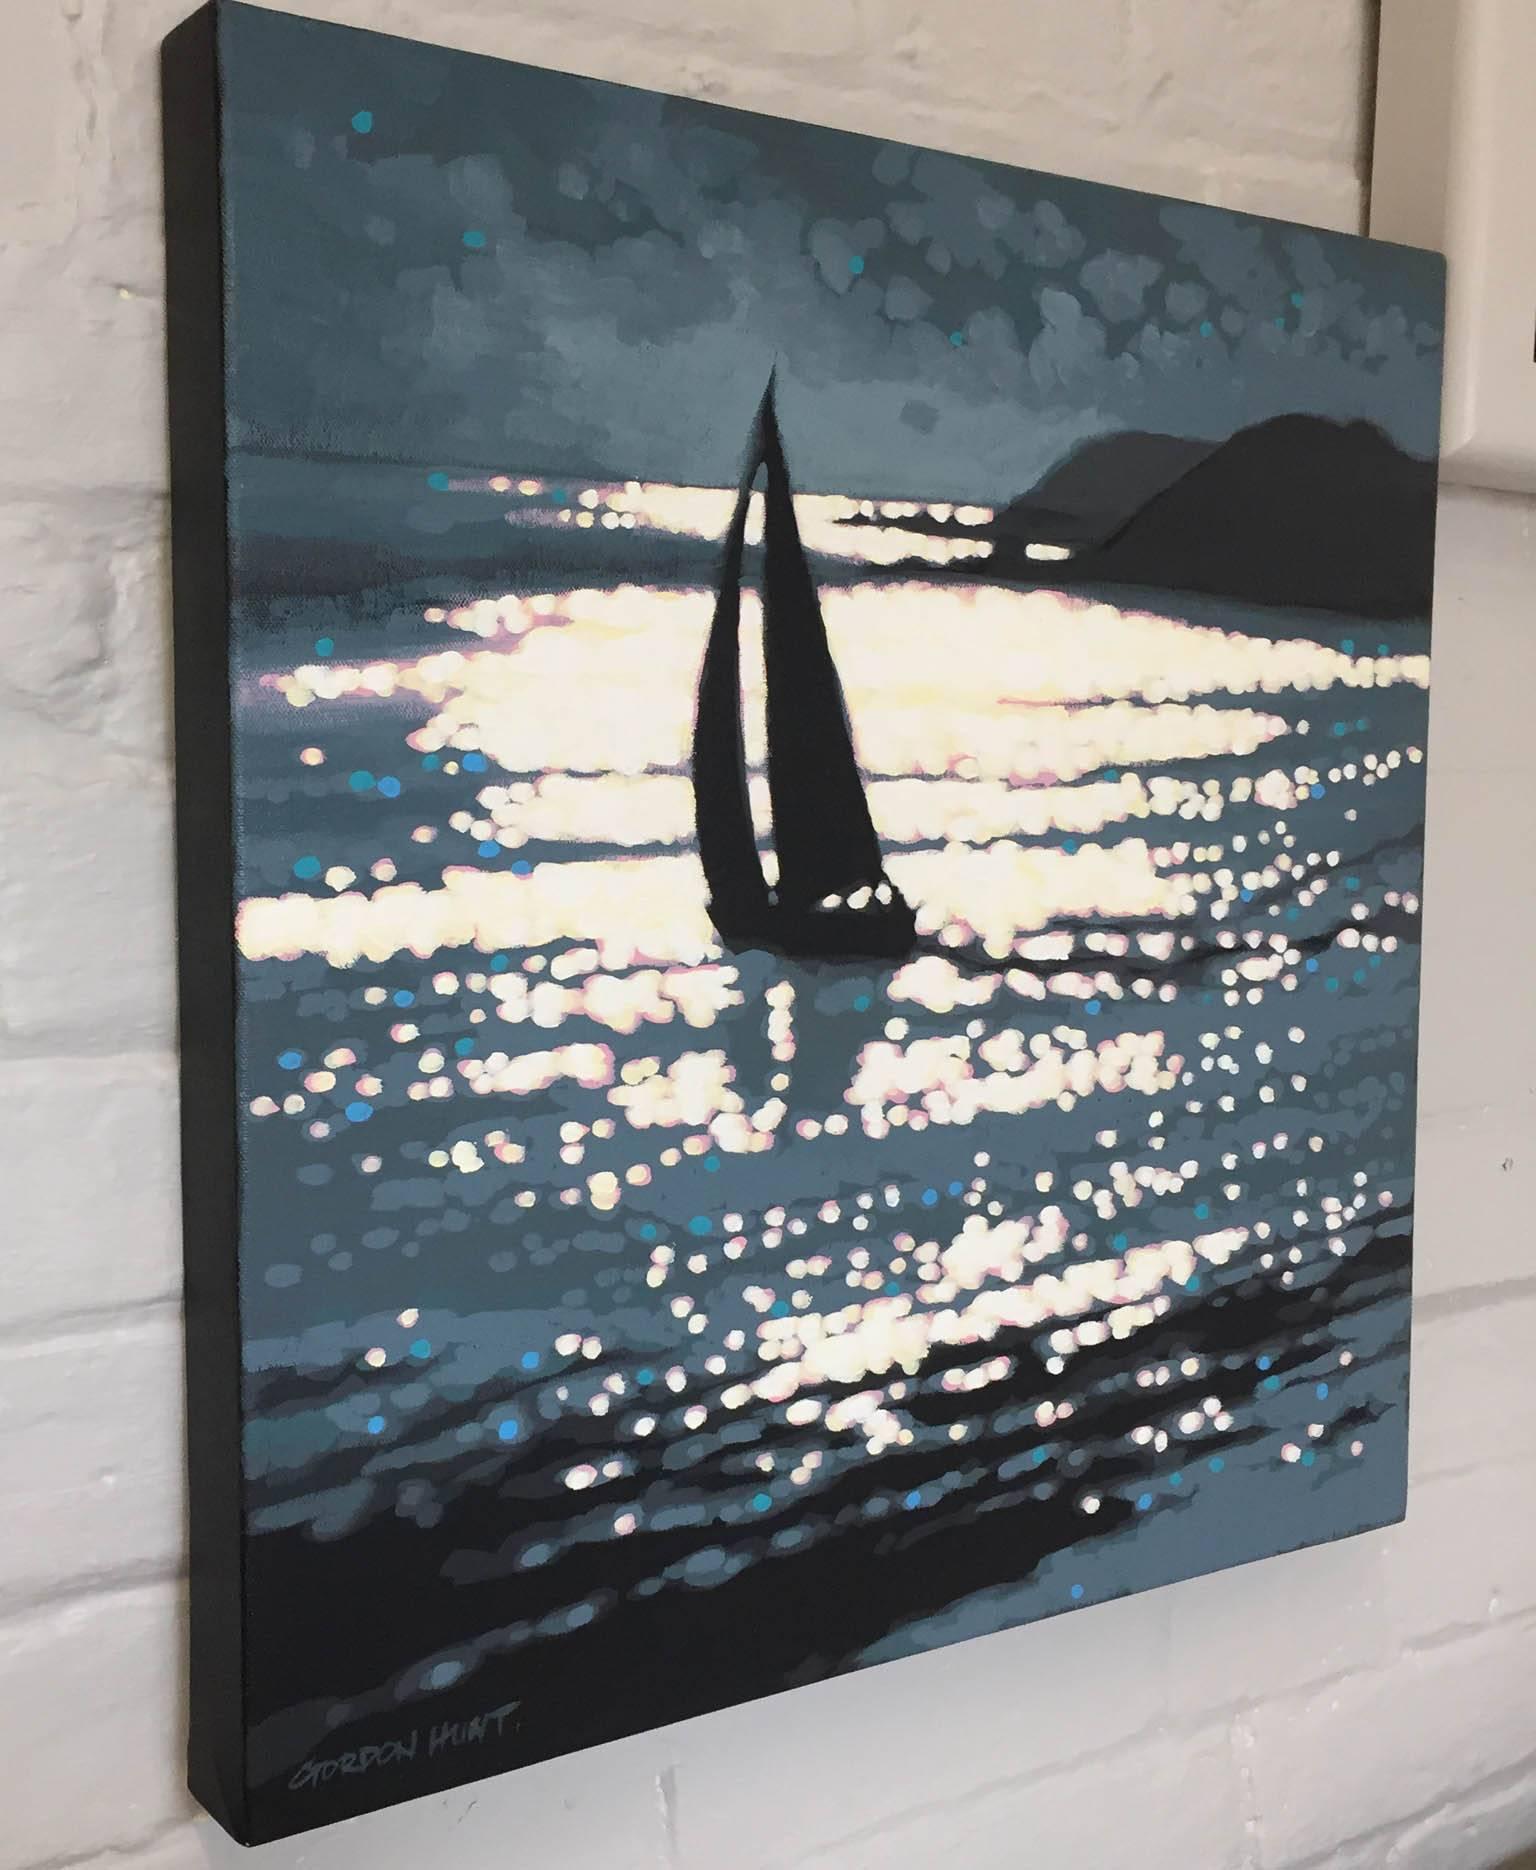 Gordon Hunt
Across the Estuary
Original Seascape Painting
Oil Paint on Canvas
Canvas Size: H 50cm x W 50cm x D 4cm
Sold Unframed
Please note that insitu images are purely an indication of how a piece may look.

A Gordon Hunt original painting called